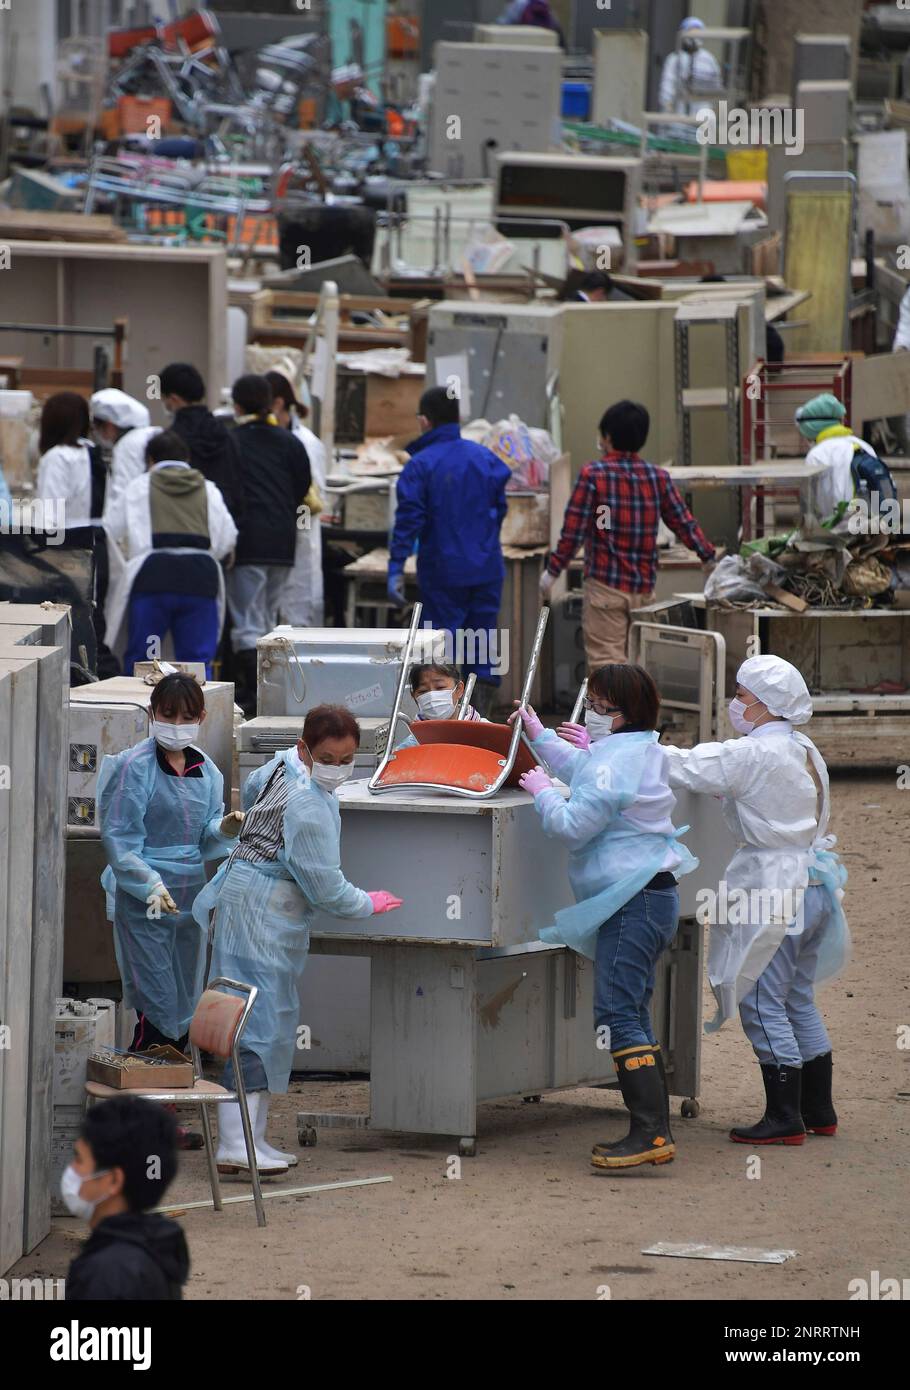 Hospital staffs clean up chairs, beds and equipment which are dirty with muddy water of flood in Motomiya City, Fukushima Prefecture on October 18, 2019. Typhoon Hagibis, a powerful super typhoon, made a landfall in Japan on Oct. 12th, and caused huge damage in wide area of Japan. ( The Yomiuri Shimbun via AP Images ) Stock Photo